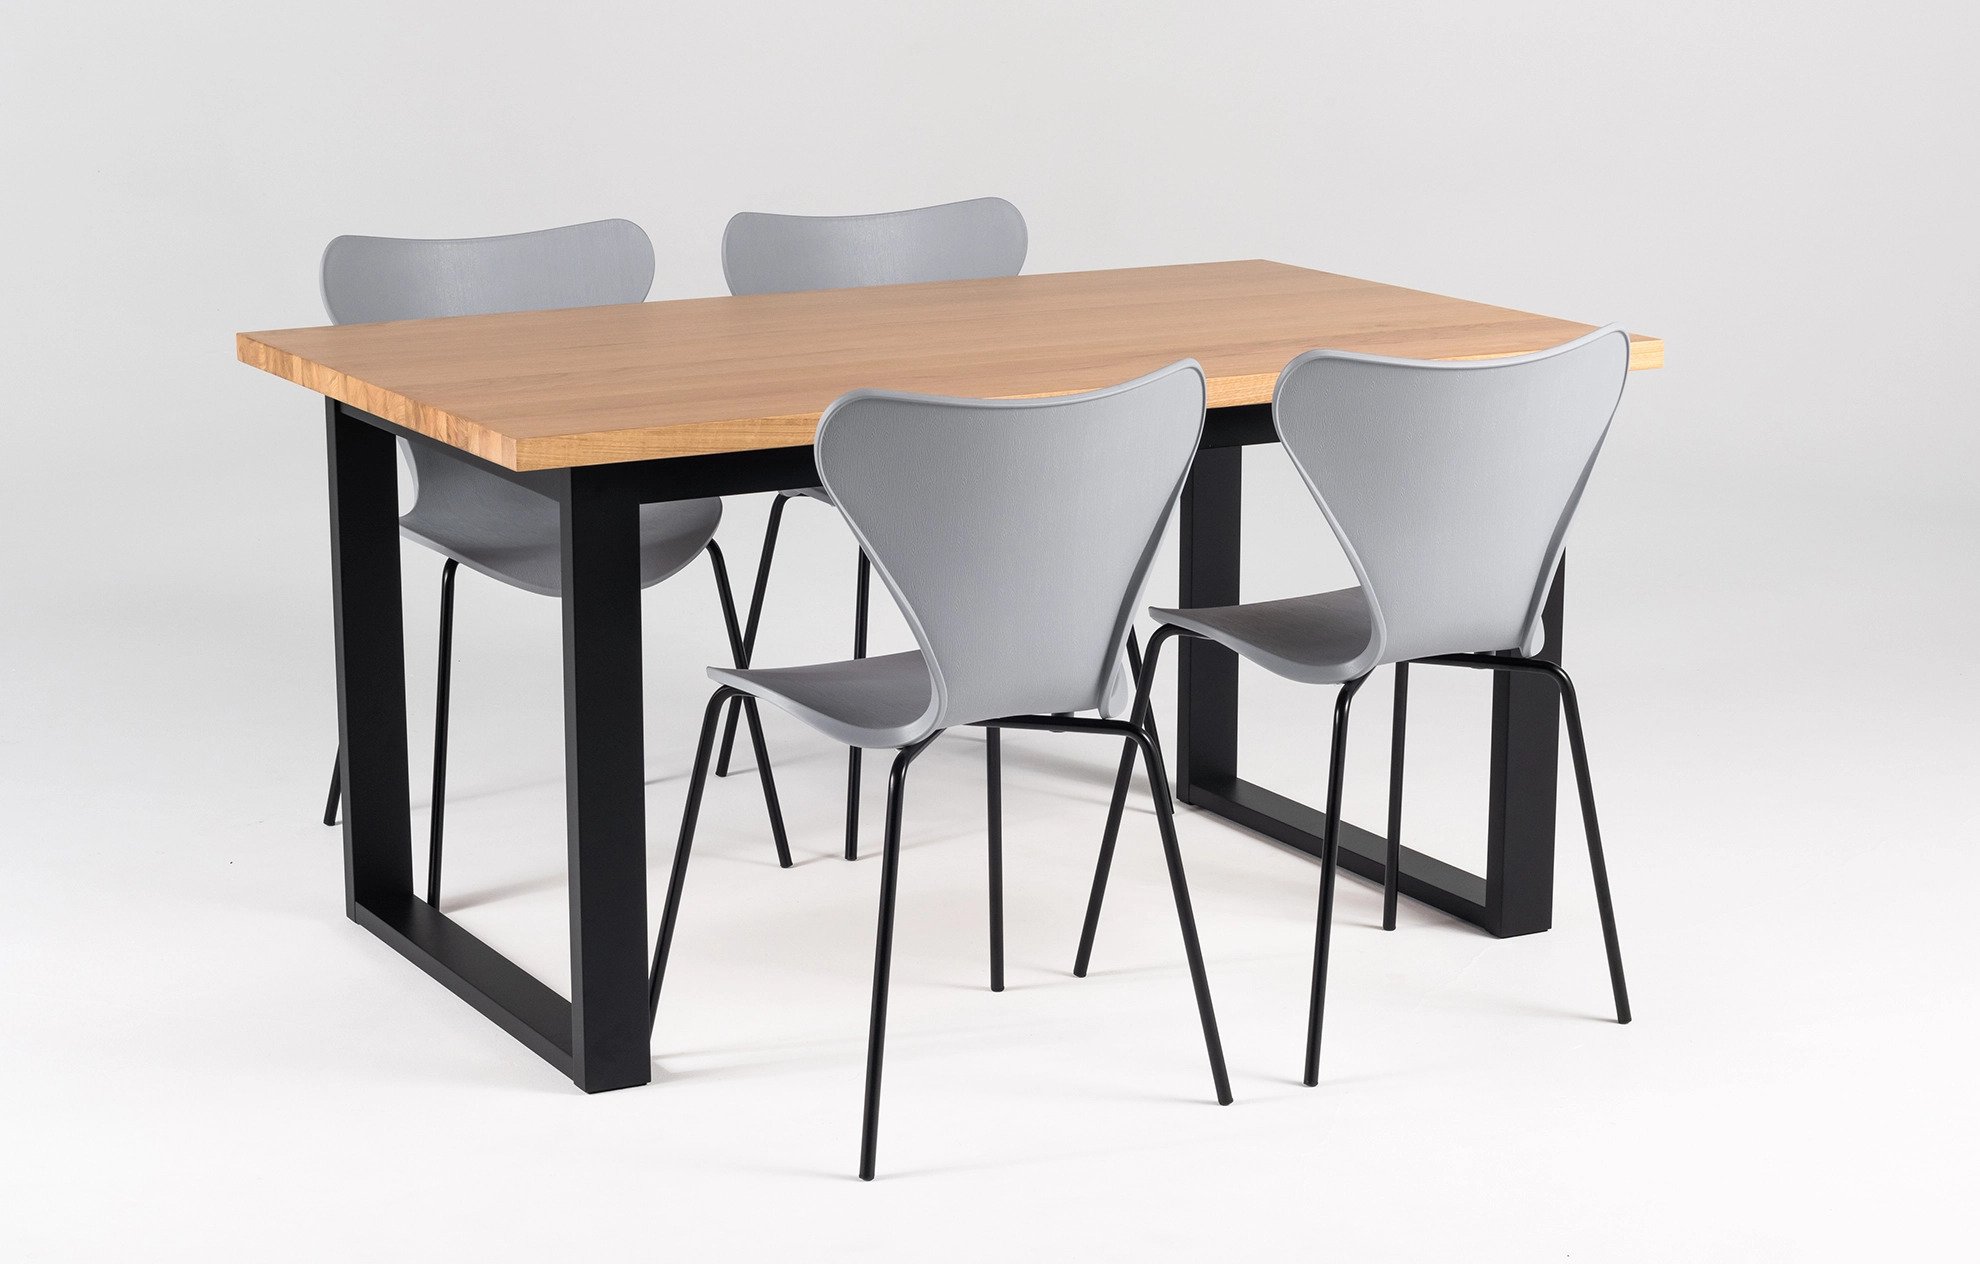 Shelton Fleur 4 seater designer dining set with an oak veneer table top and polypropylene chairs with steel legs